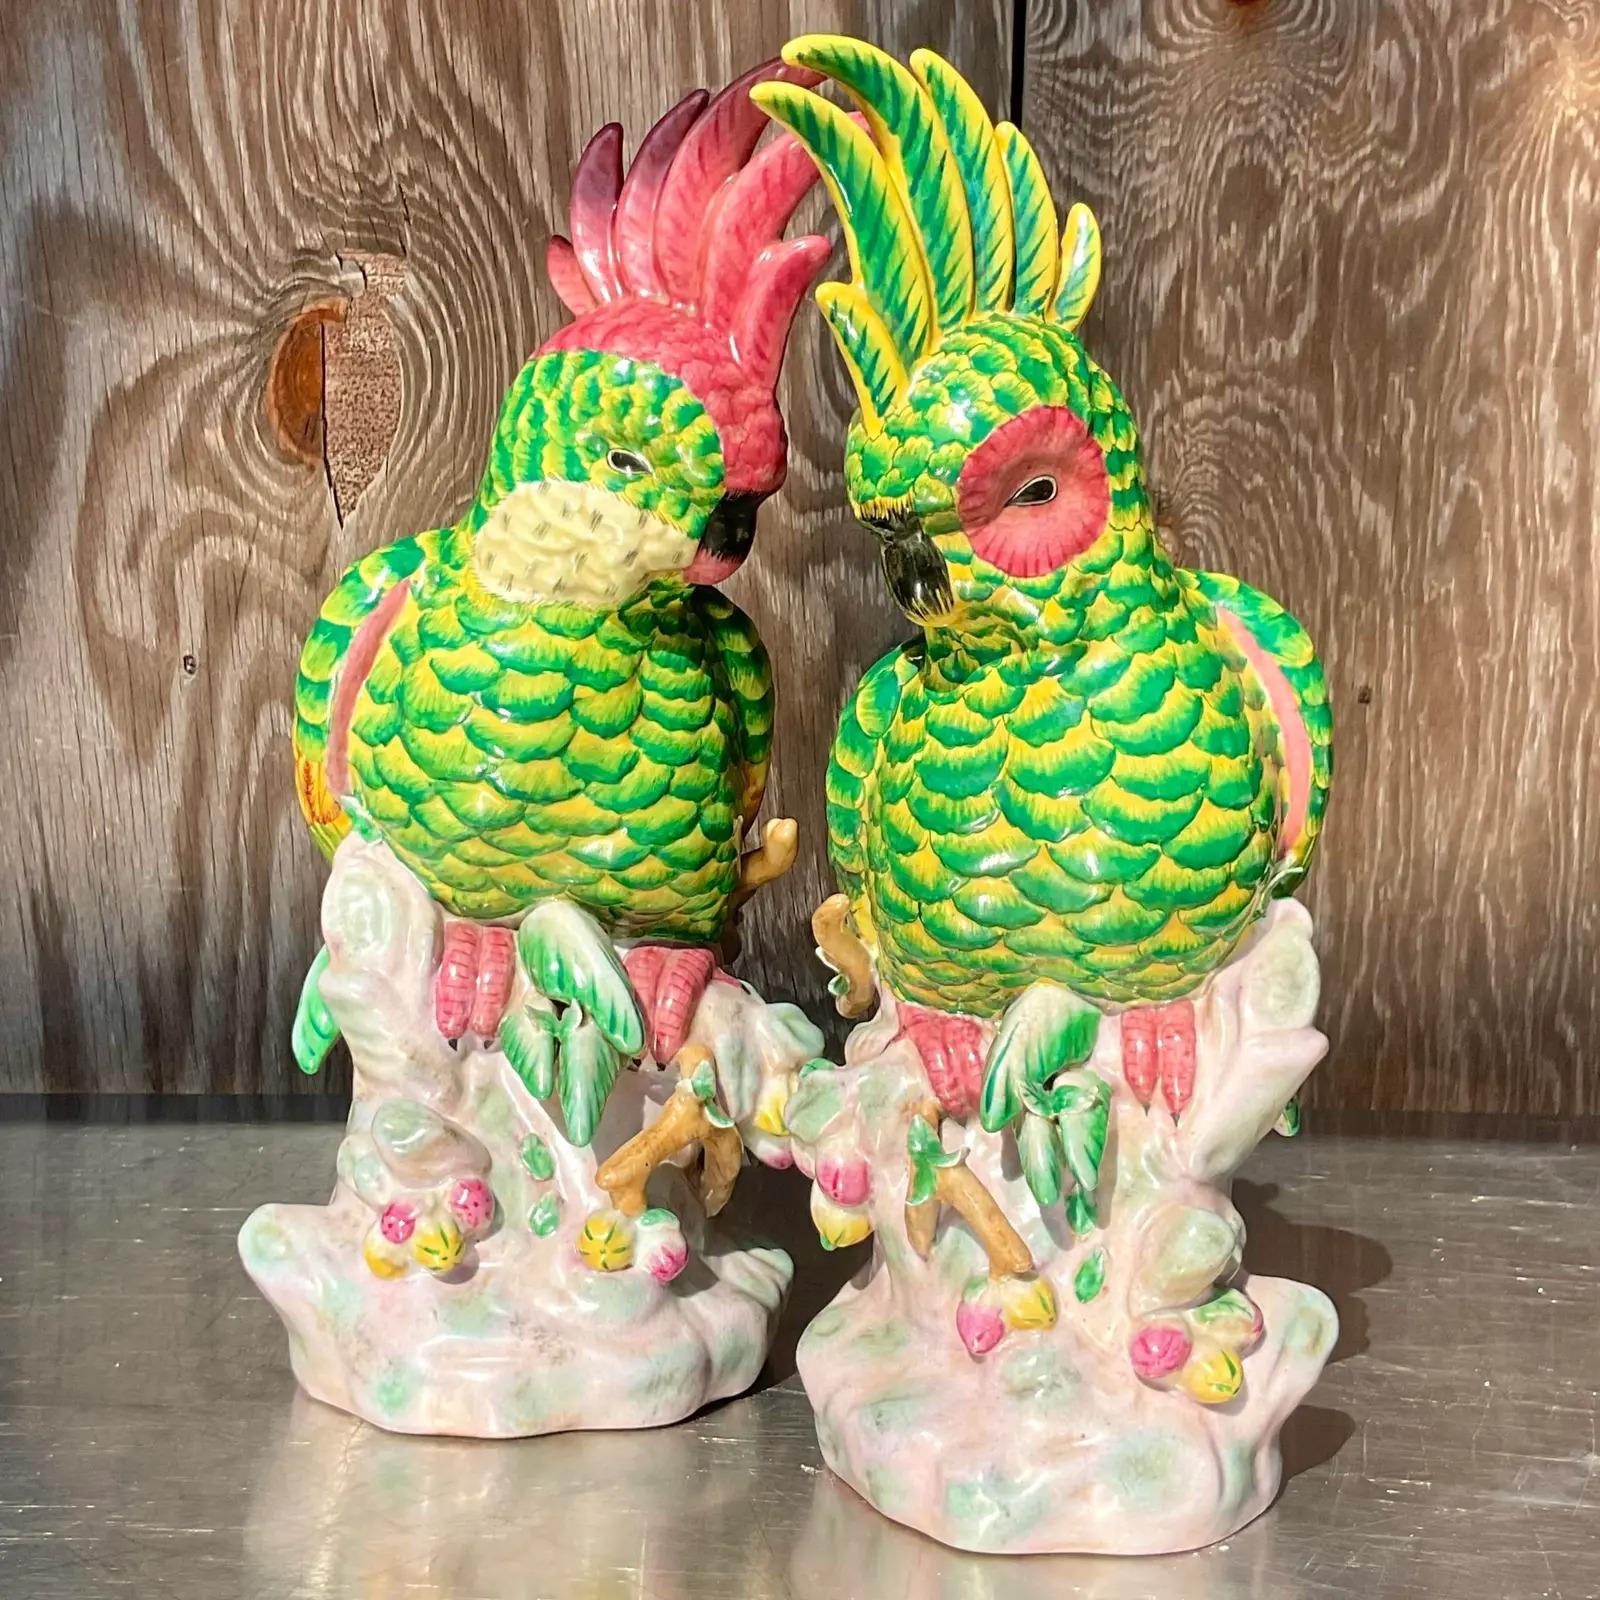 Vintage pair of Regency glazed ceramic cockatoos. Beautiful hand painted detail in bright clear colors. Perfect as is or would also be fabulous converged to lamps. You decide! Acquired from a Palm Beach estate.

Smaller bird dimensions - 7 x 7 x